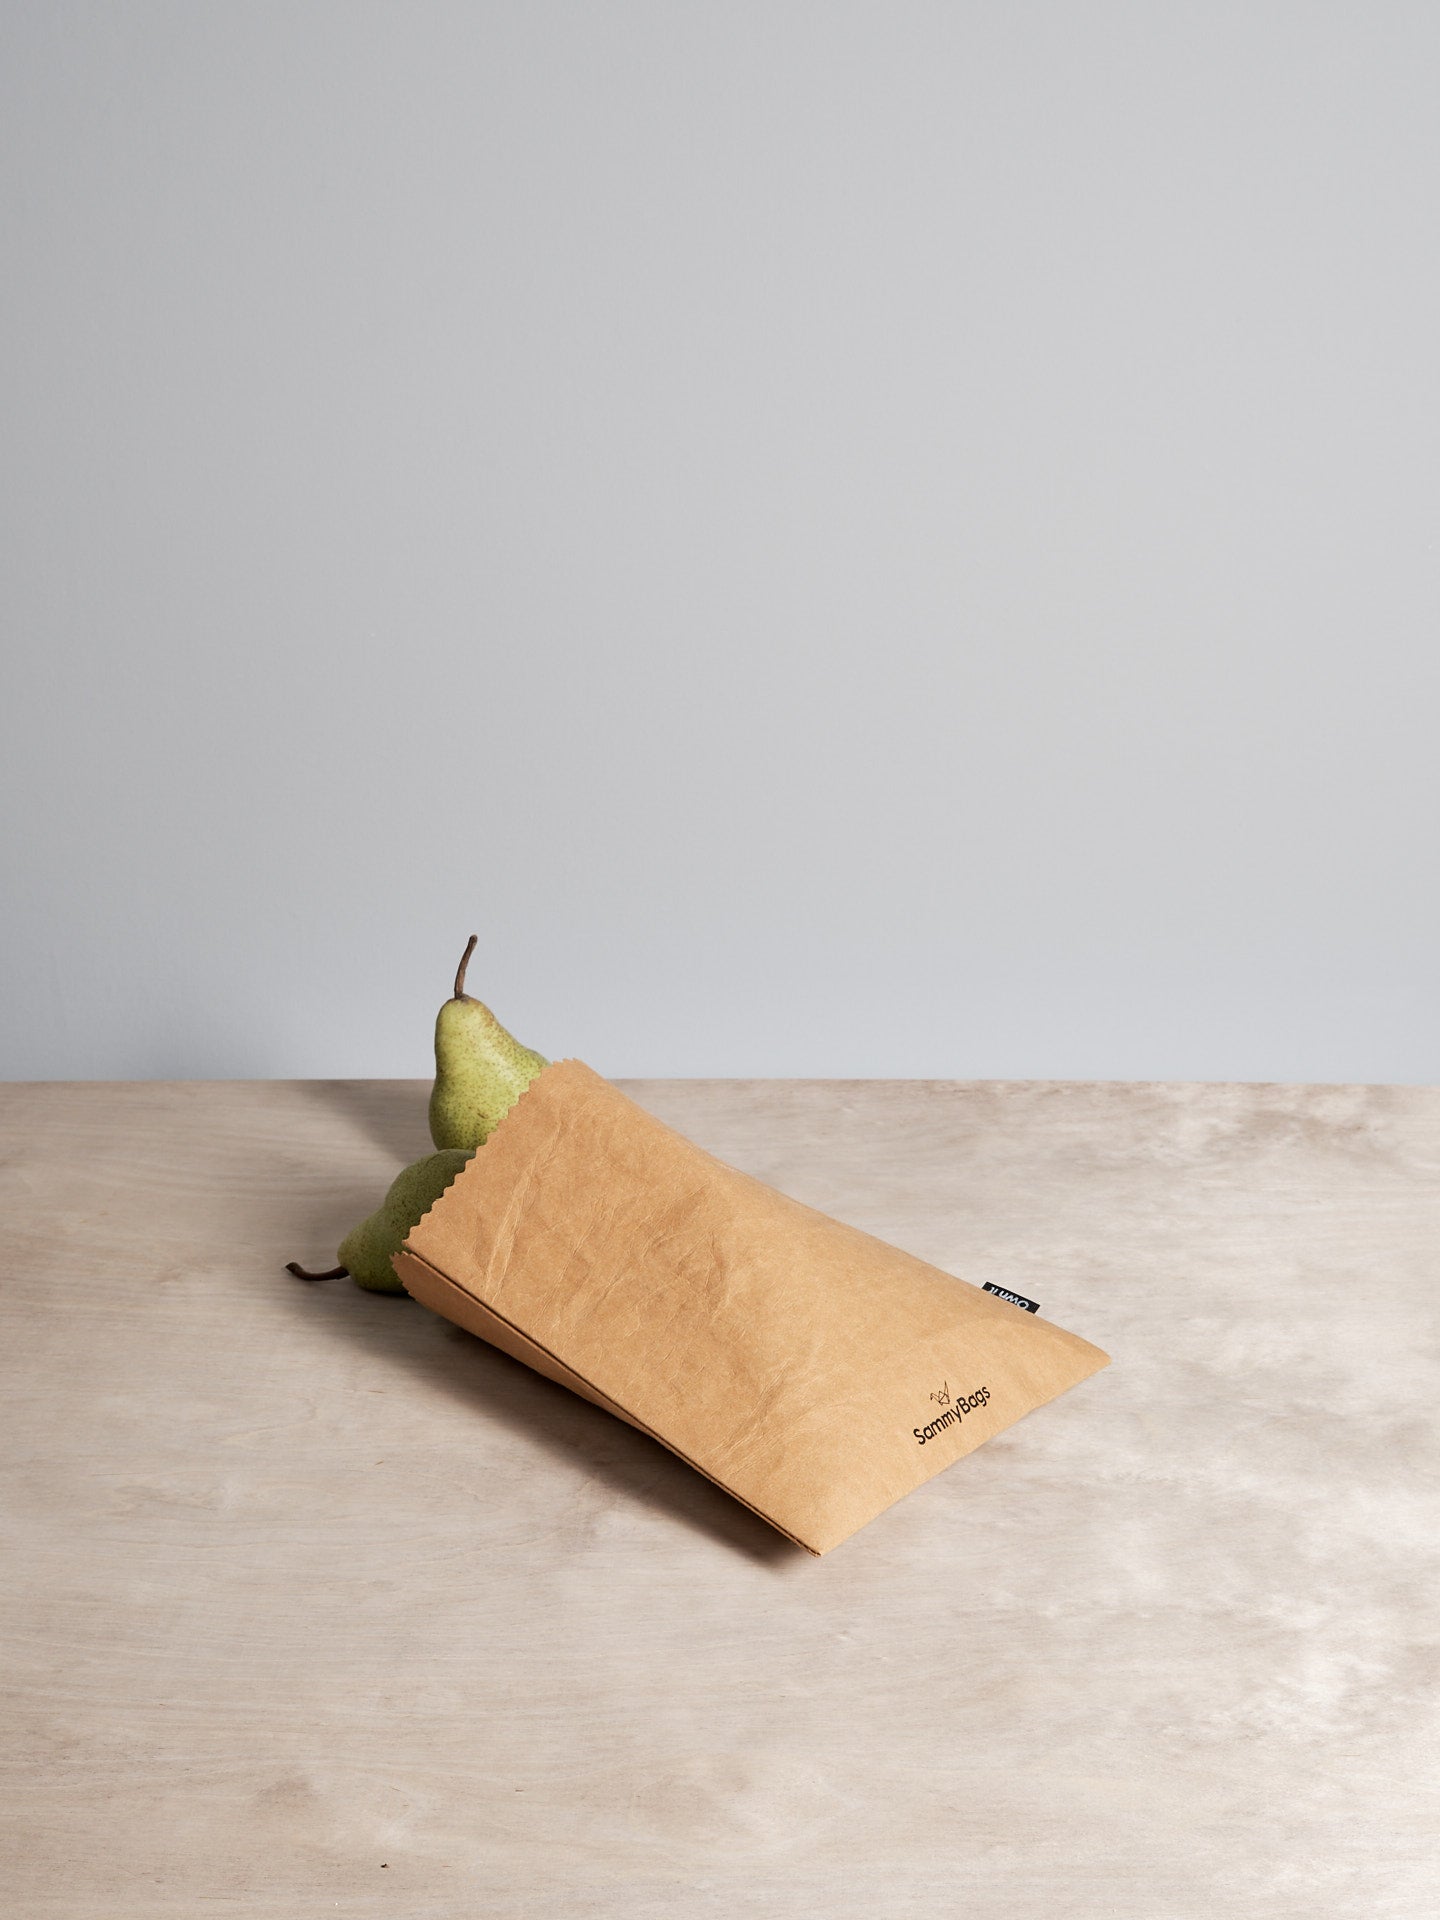 A Sammy Bags Reusable Flat Bag - Medium with a pear in it.